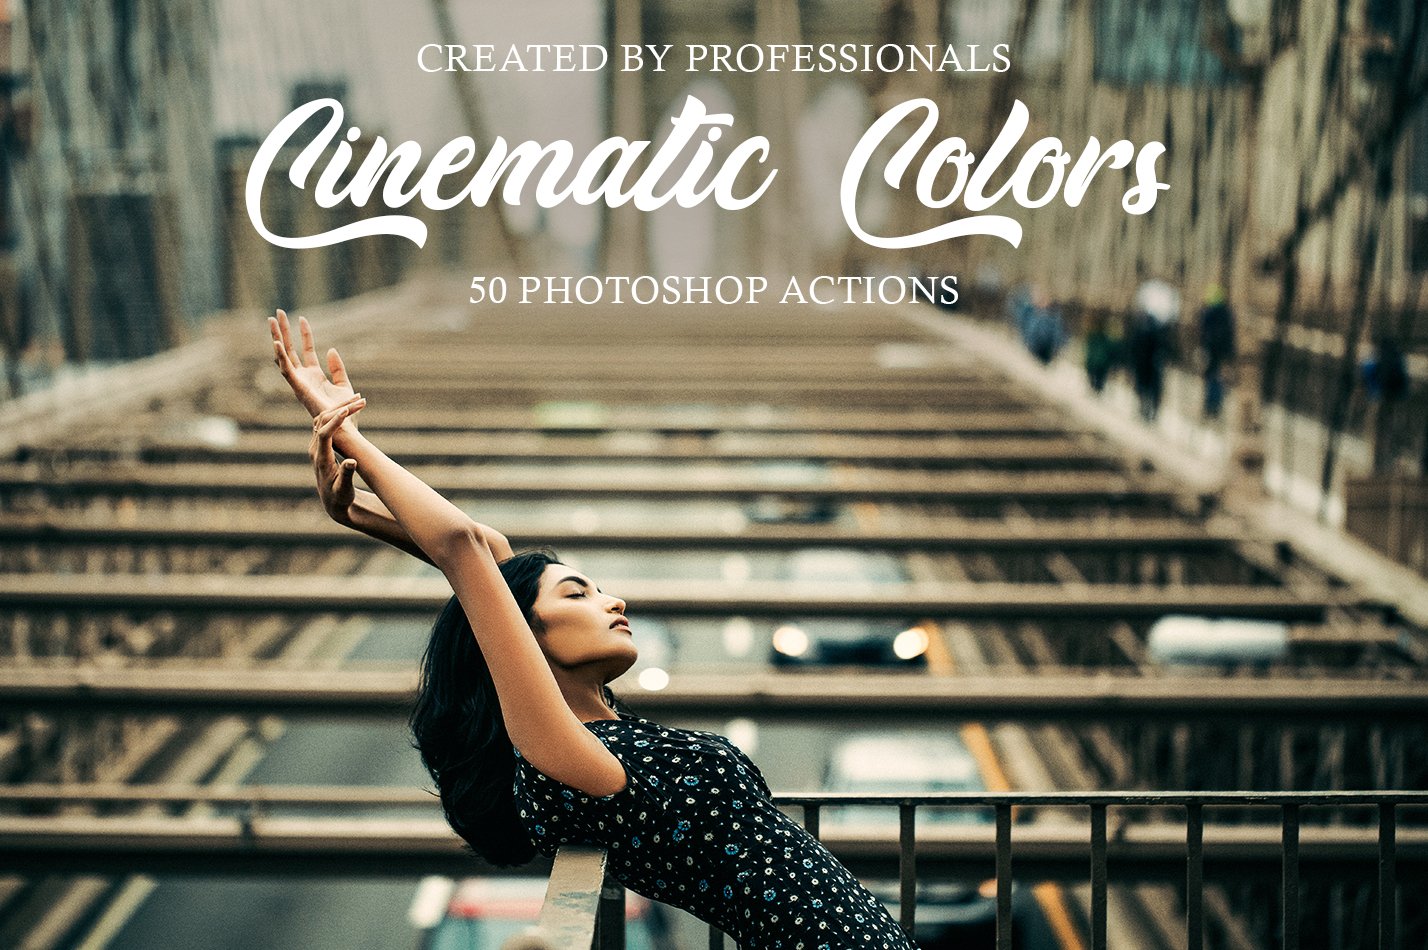 Cinematic Colors Photoshop Actionscover image.